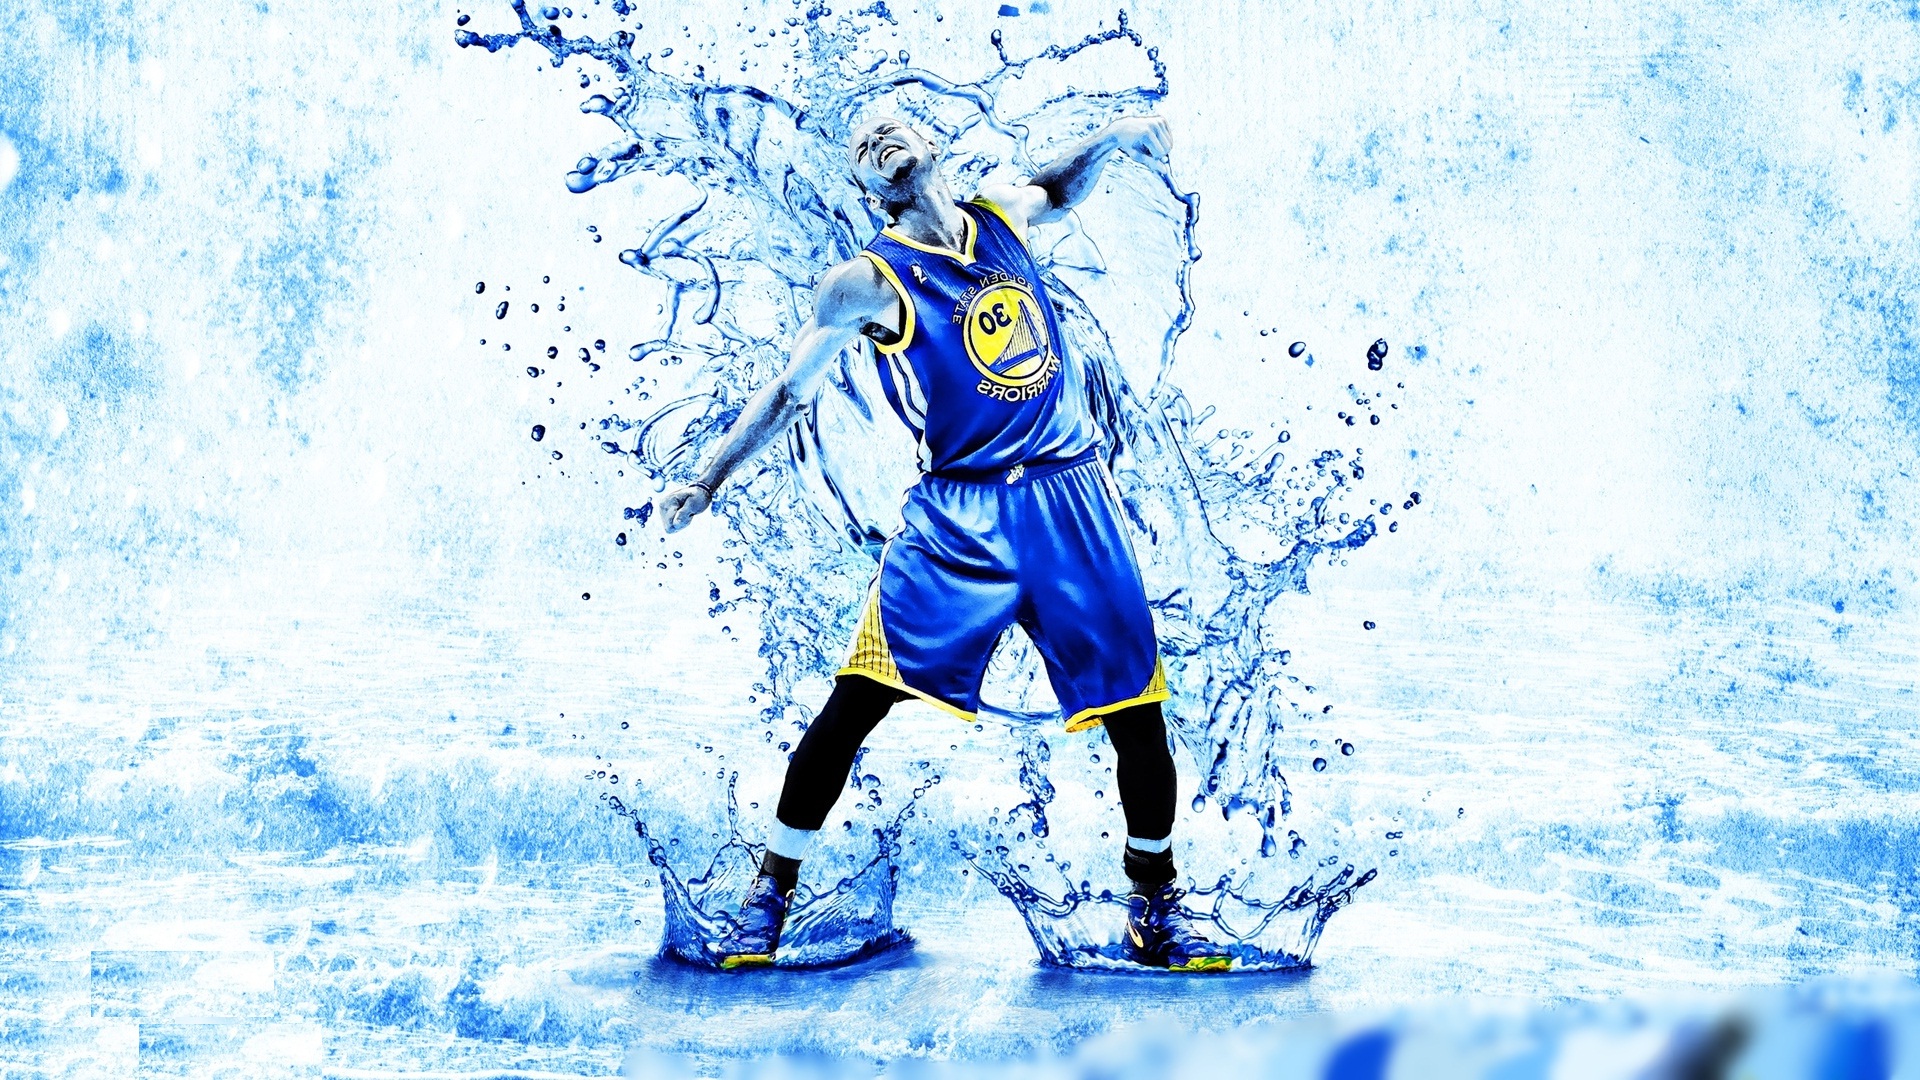 Stephen Curry Wallpaper Image Gallery And More